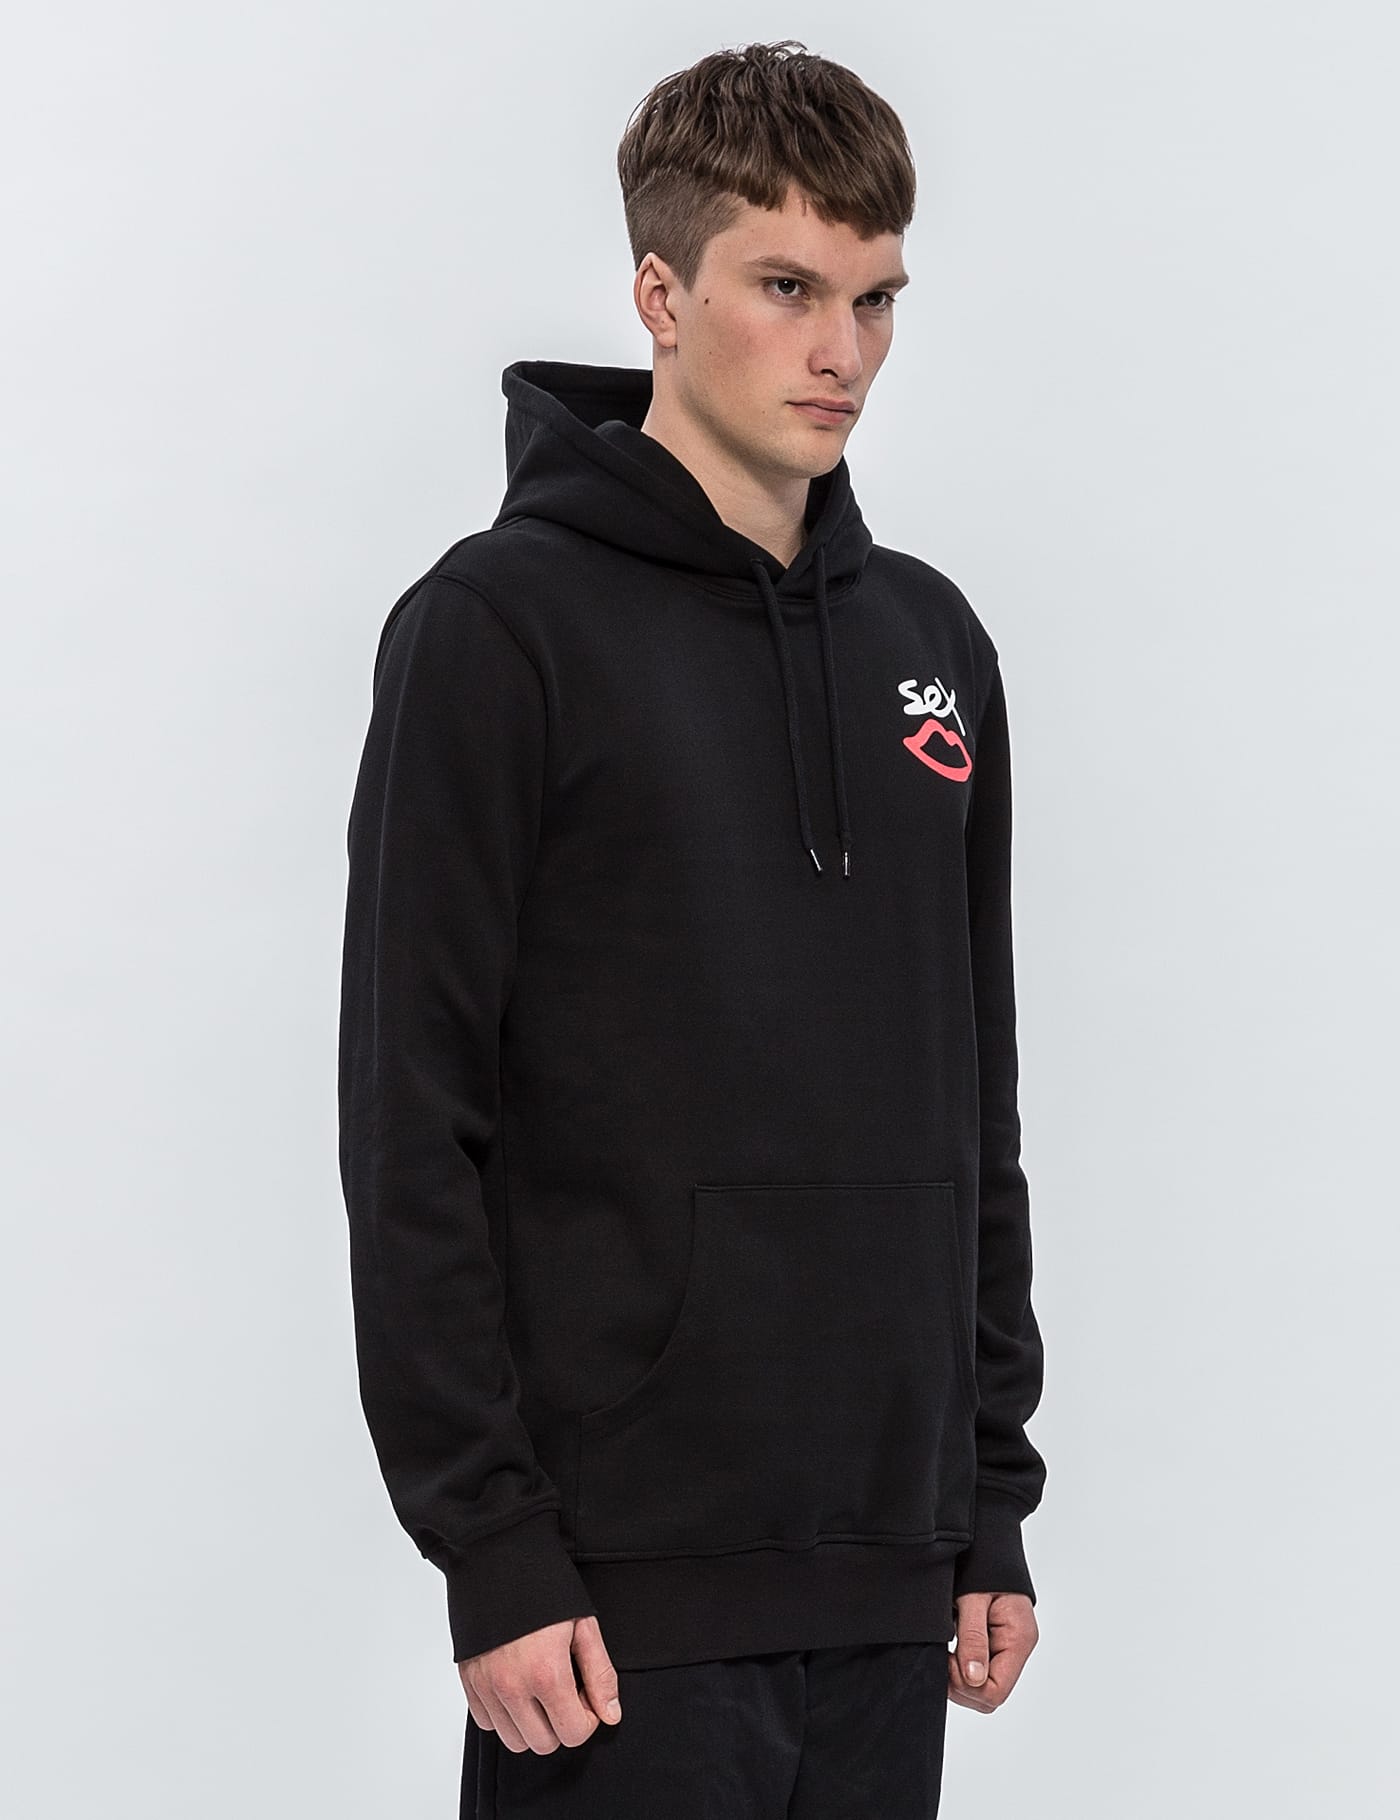 Sex Skateboards - Sex Logo Hoodie | HBX - Globally Curated Fashion 